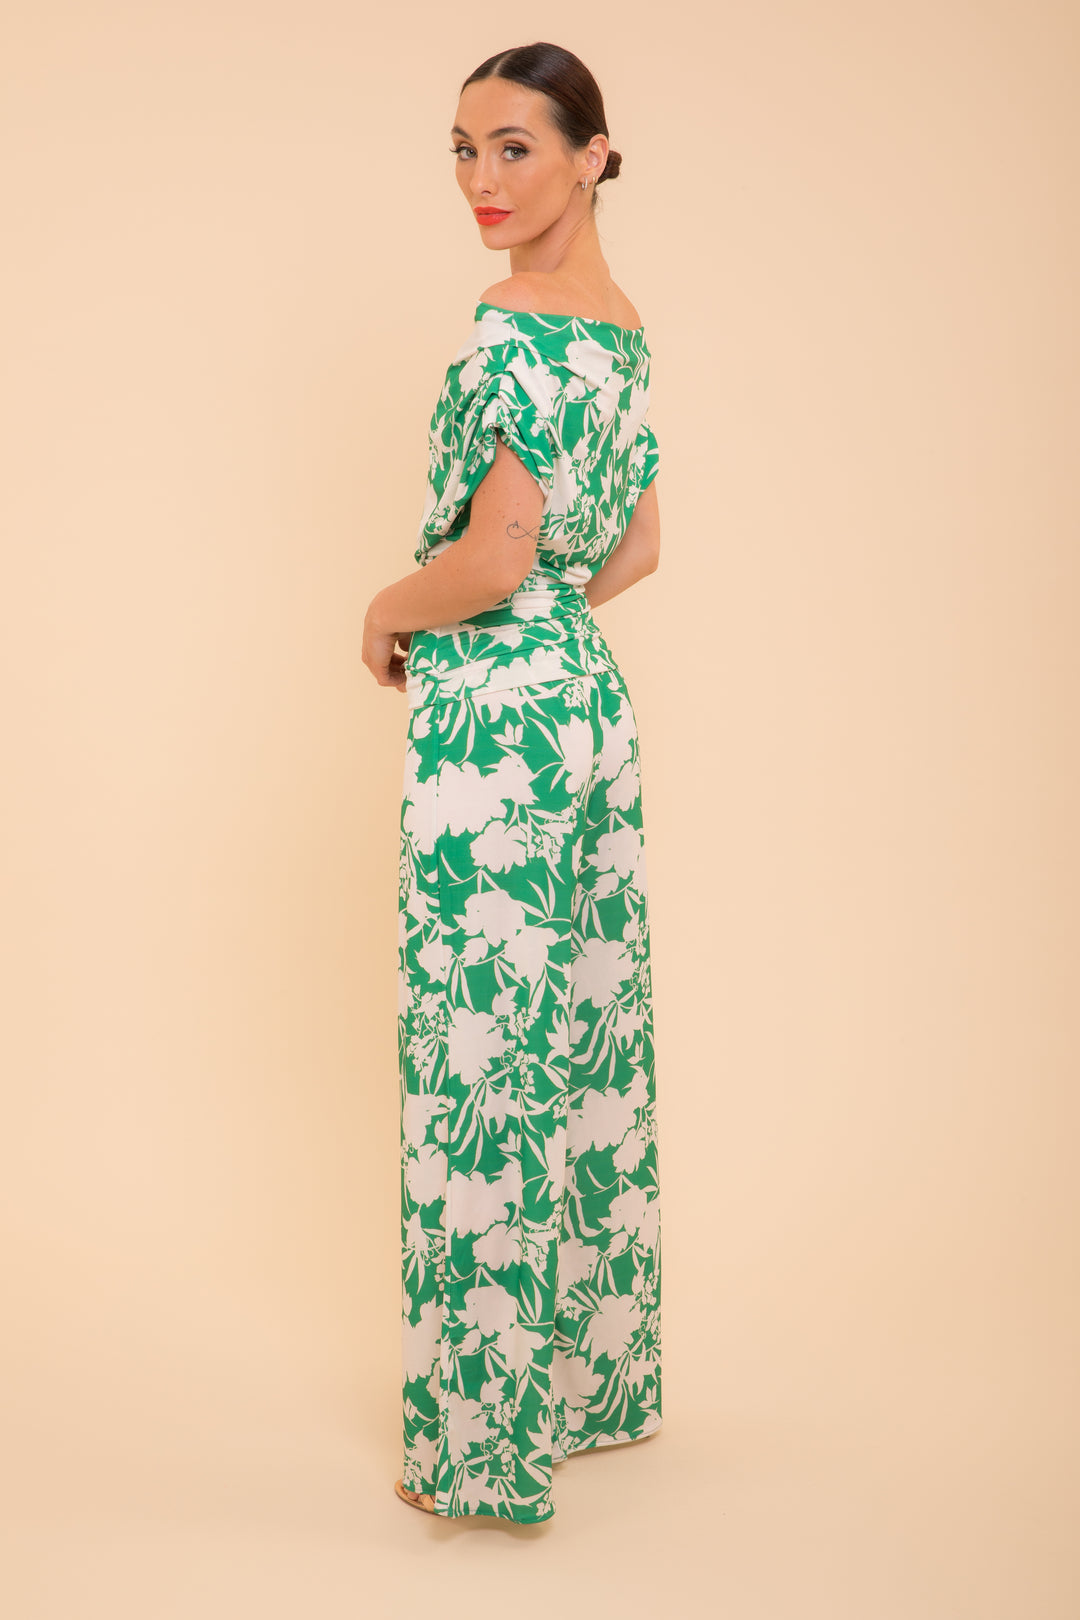 ATOM LABEL carbon jumpsuit in green & ivory print